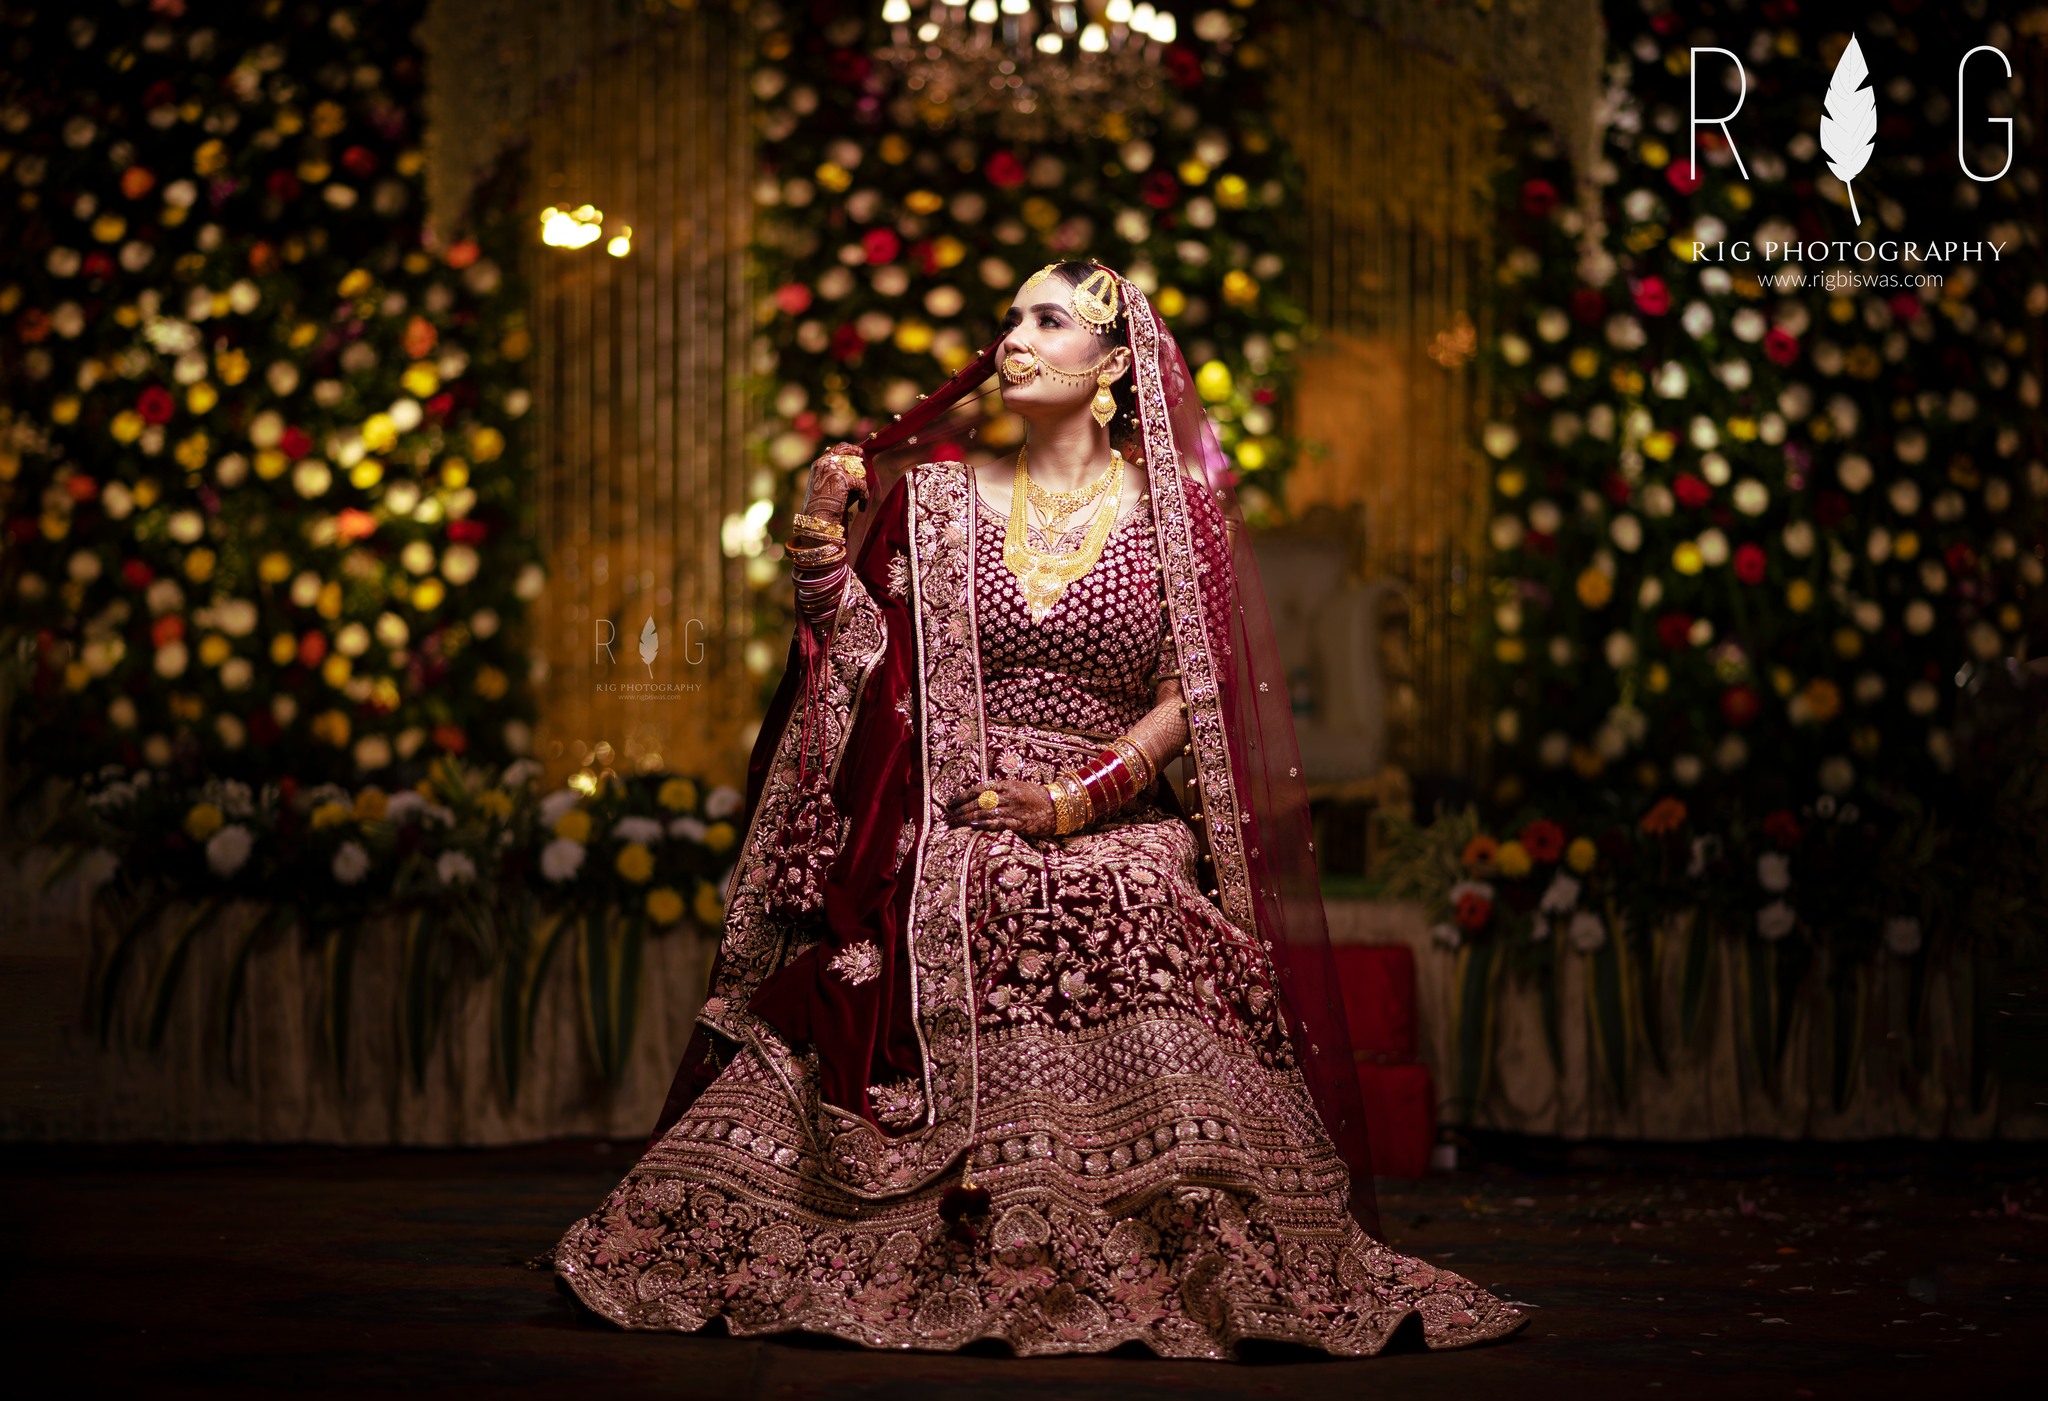 StealWorthy South Indian Bridesmaids Photoshoot Ideas For Weddings